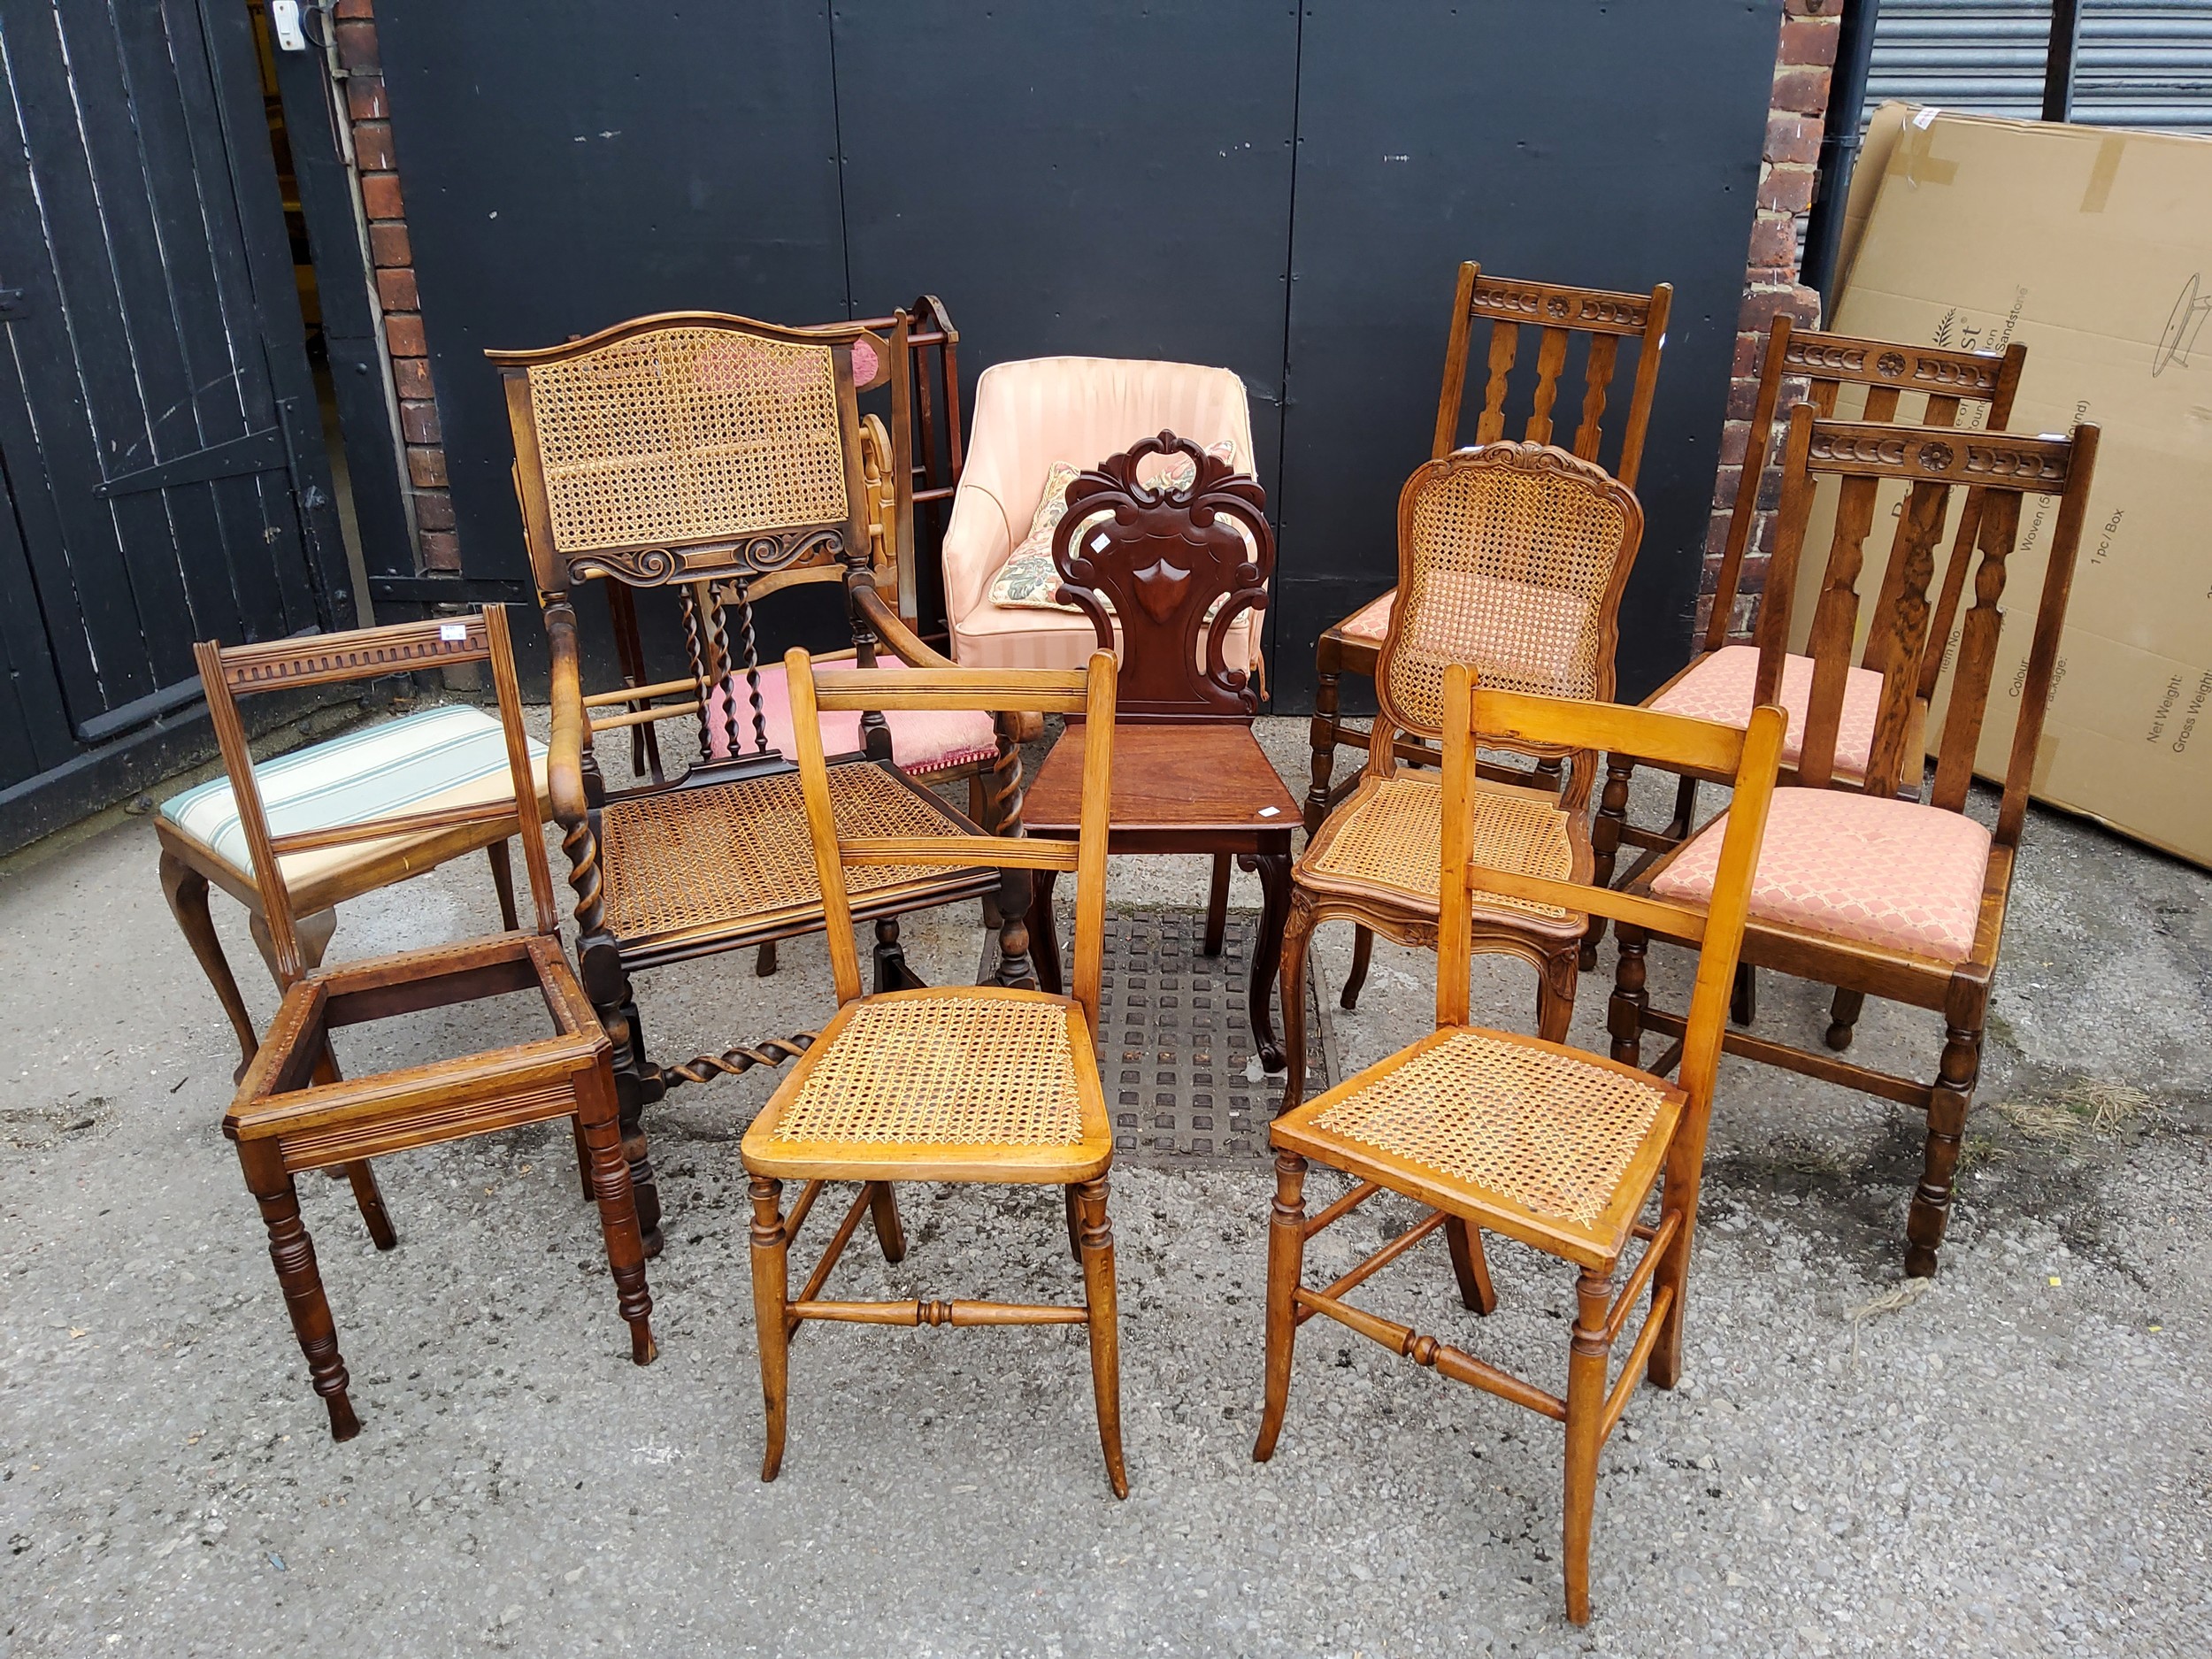 Harlequin set of chairs, footstool and towel racks, including a Victorian mahogany hall chair,